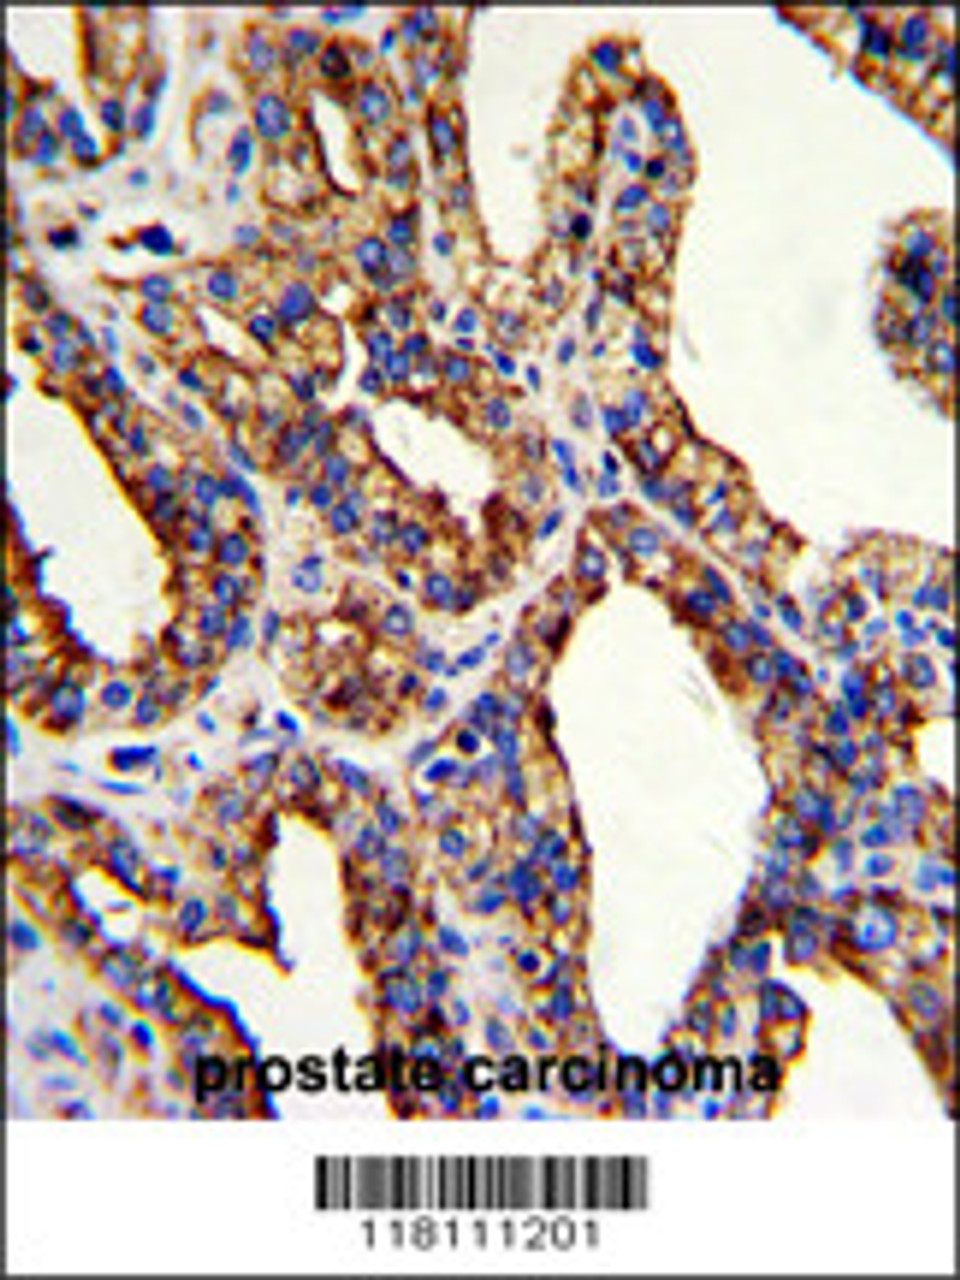 Formalin-fixed and paraffin-embedded human prostate carcinoma with TROP2 Antibody, which was peroxidase-conjugated to the secondary antibody, followed by DAB staining.